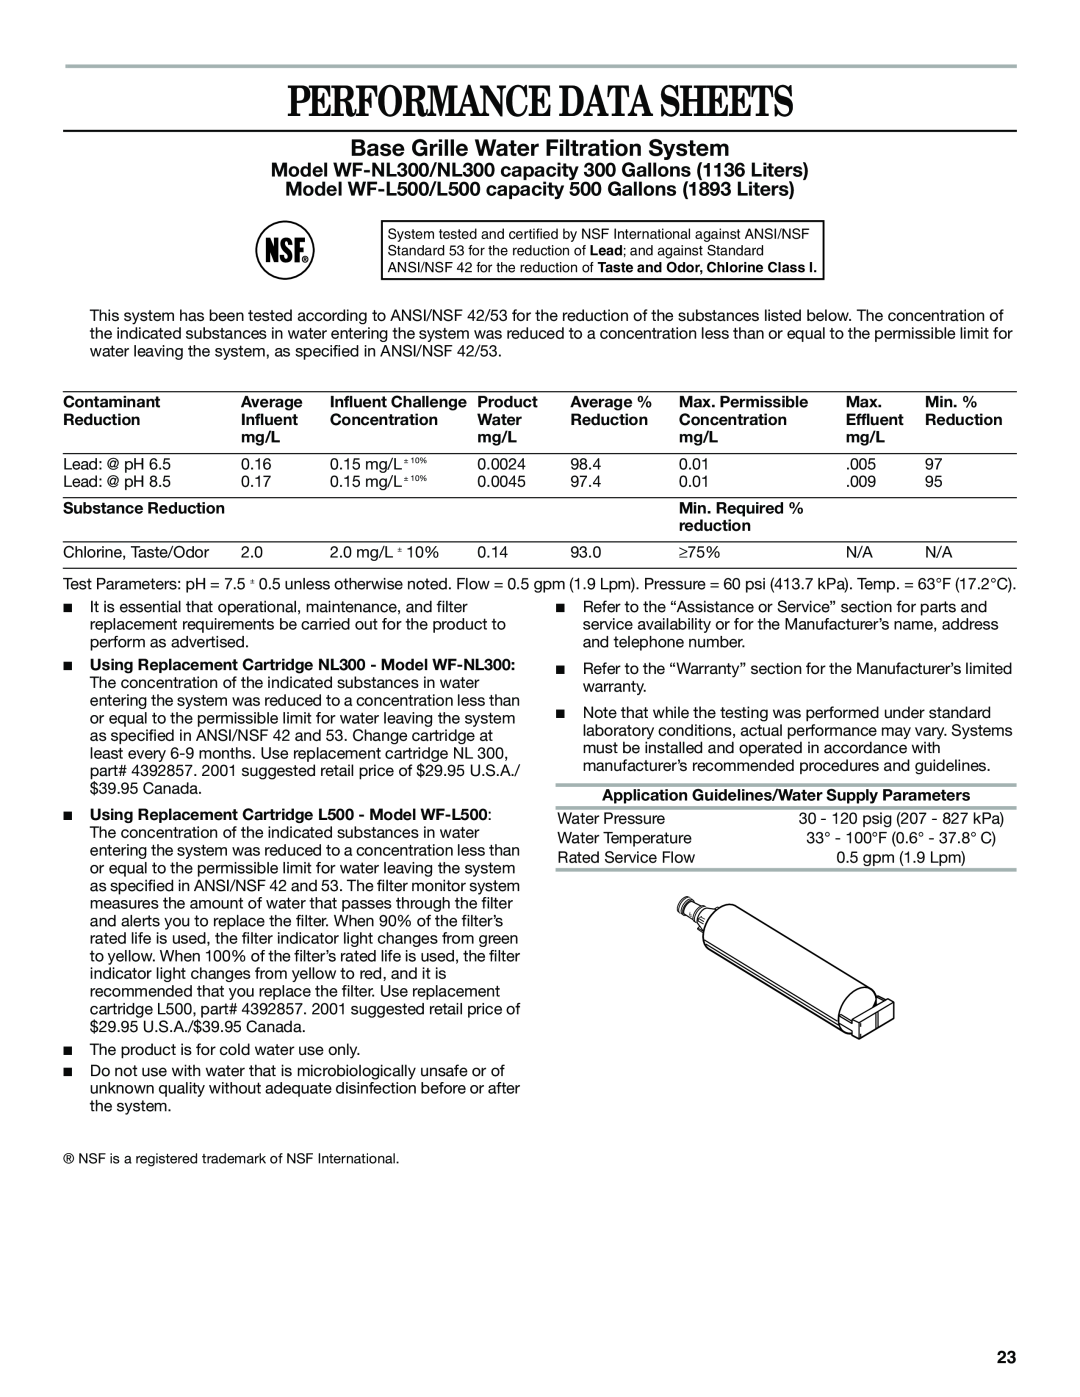 Whirlpool GS6SHANLB00 Performance Data Sheets, Base Grille Water Filtration System, Contaminant, Average, Product, Min. % 